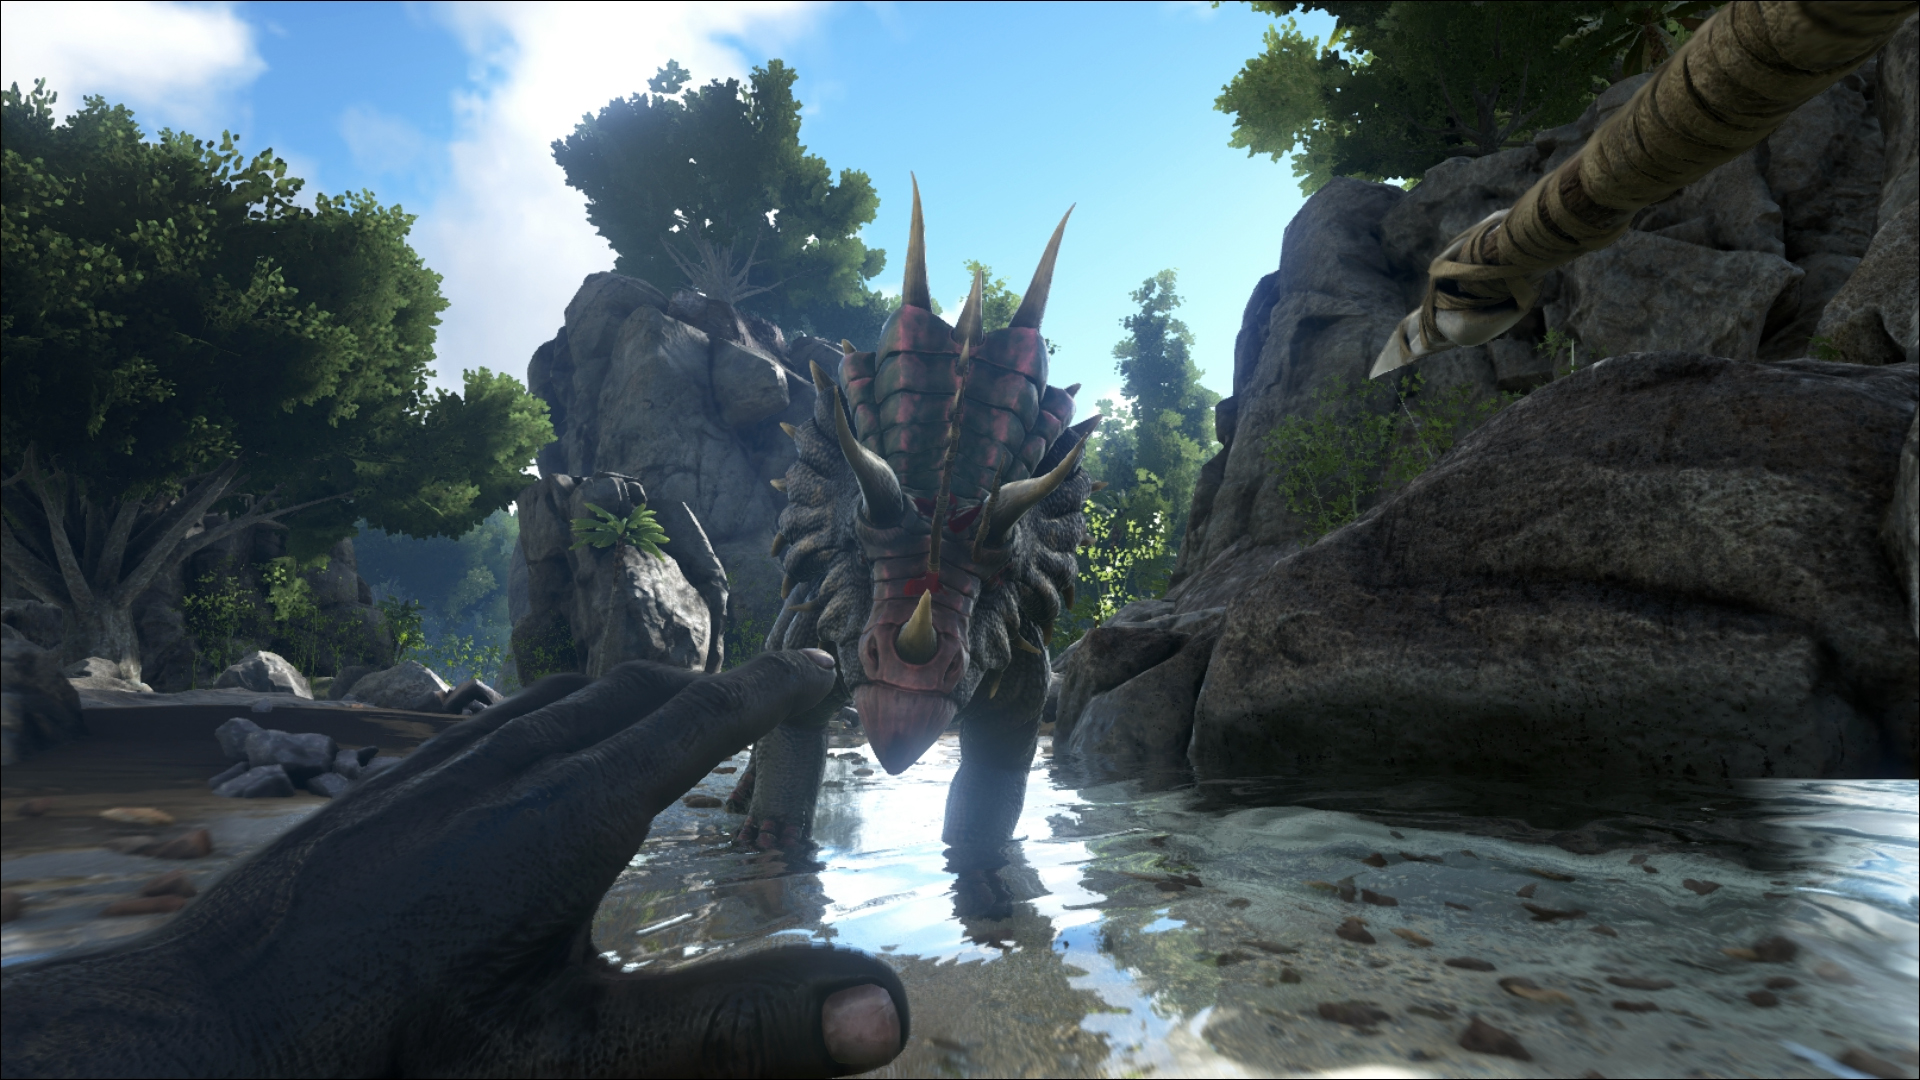 ARK: Survival Evolved Supports Project Morpheus on PS4